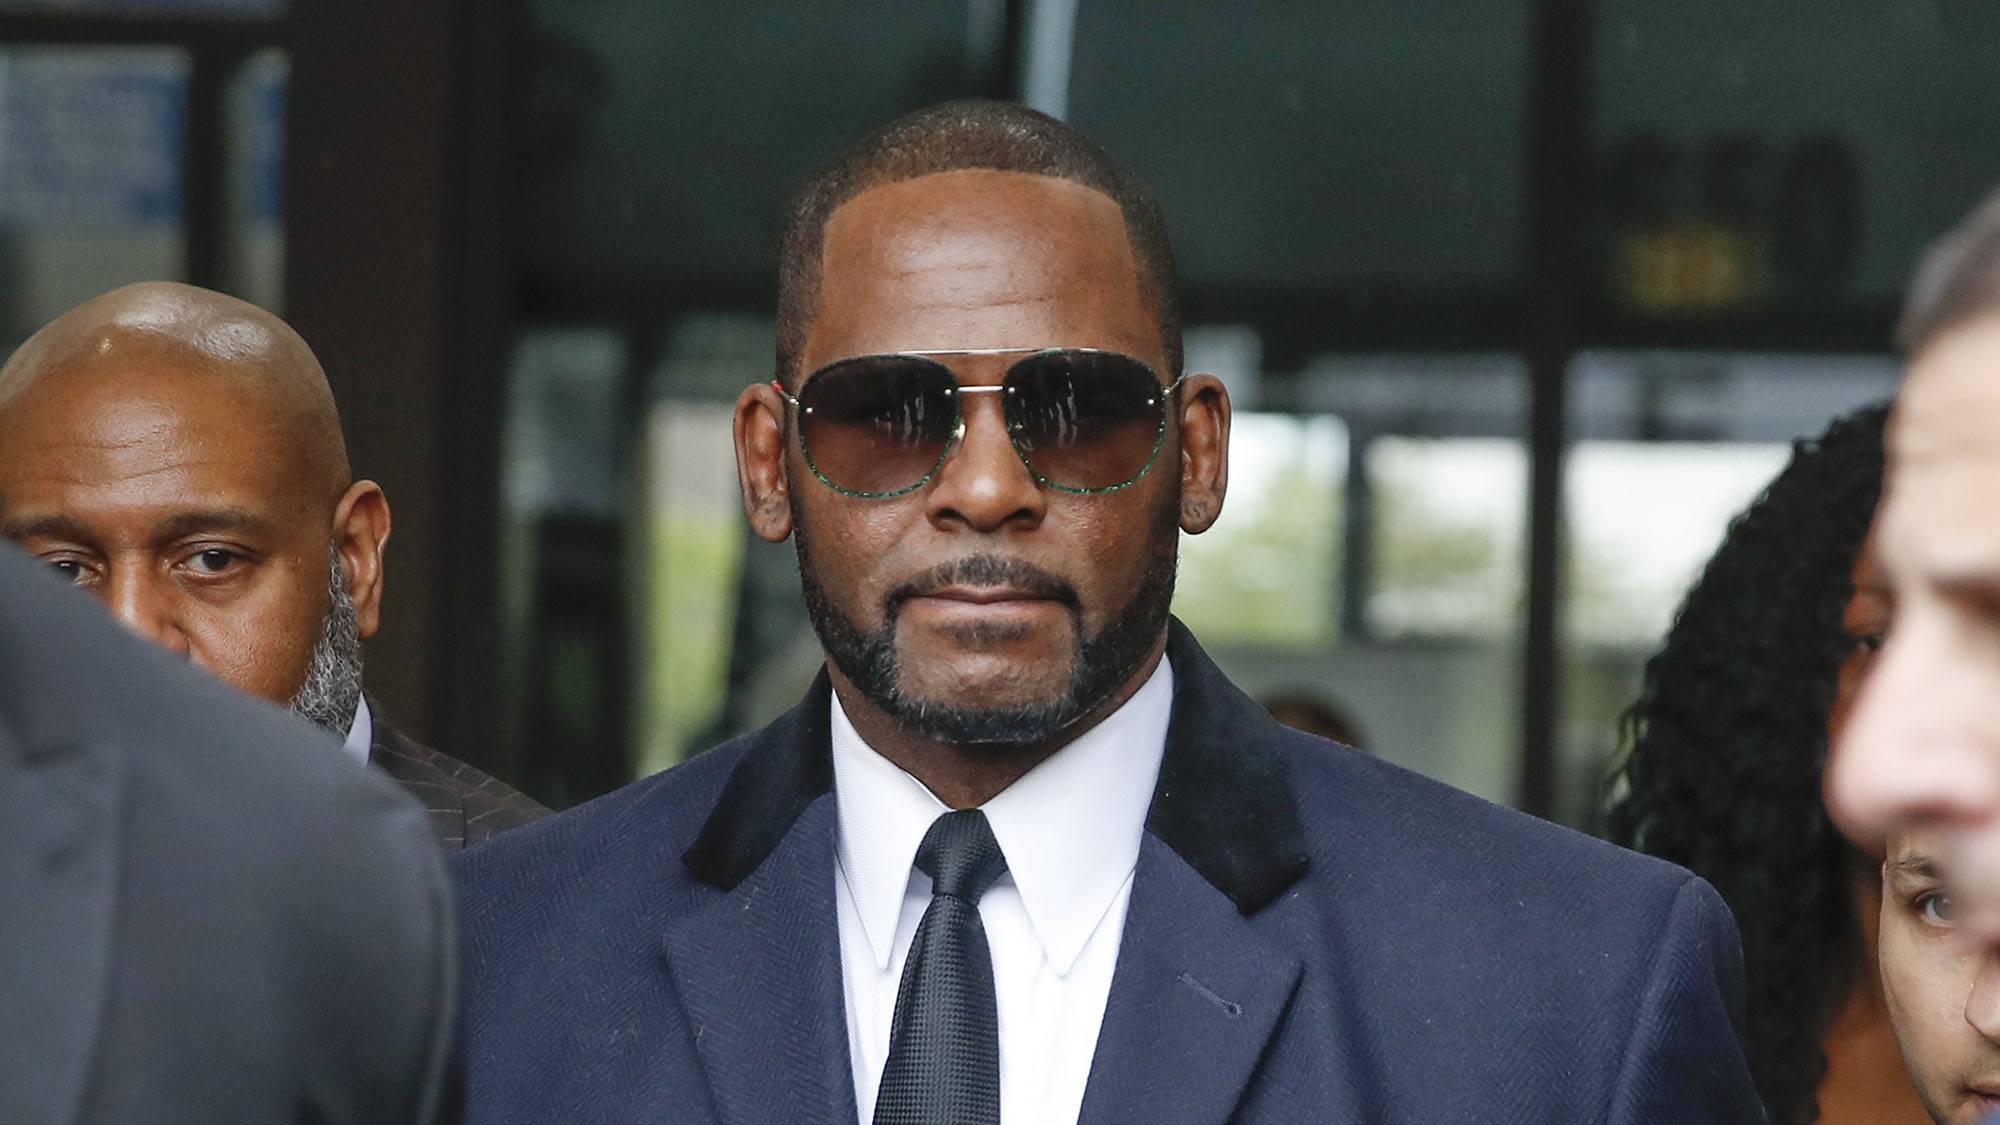 Breggers Sexvideos - Girl In Sex Videos Allegedly Recorded By R. Kelly Expected To Testify |  News | BET